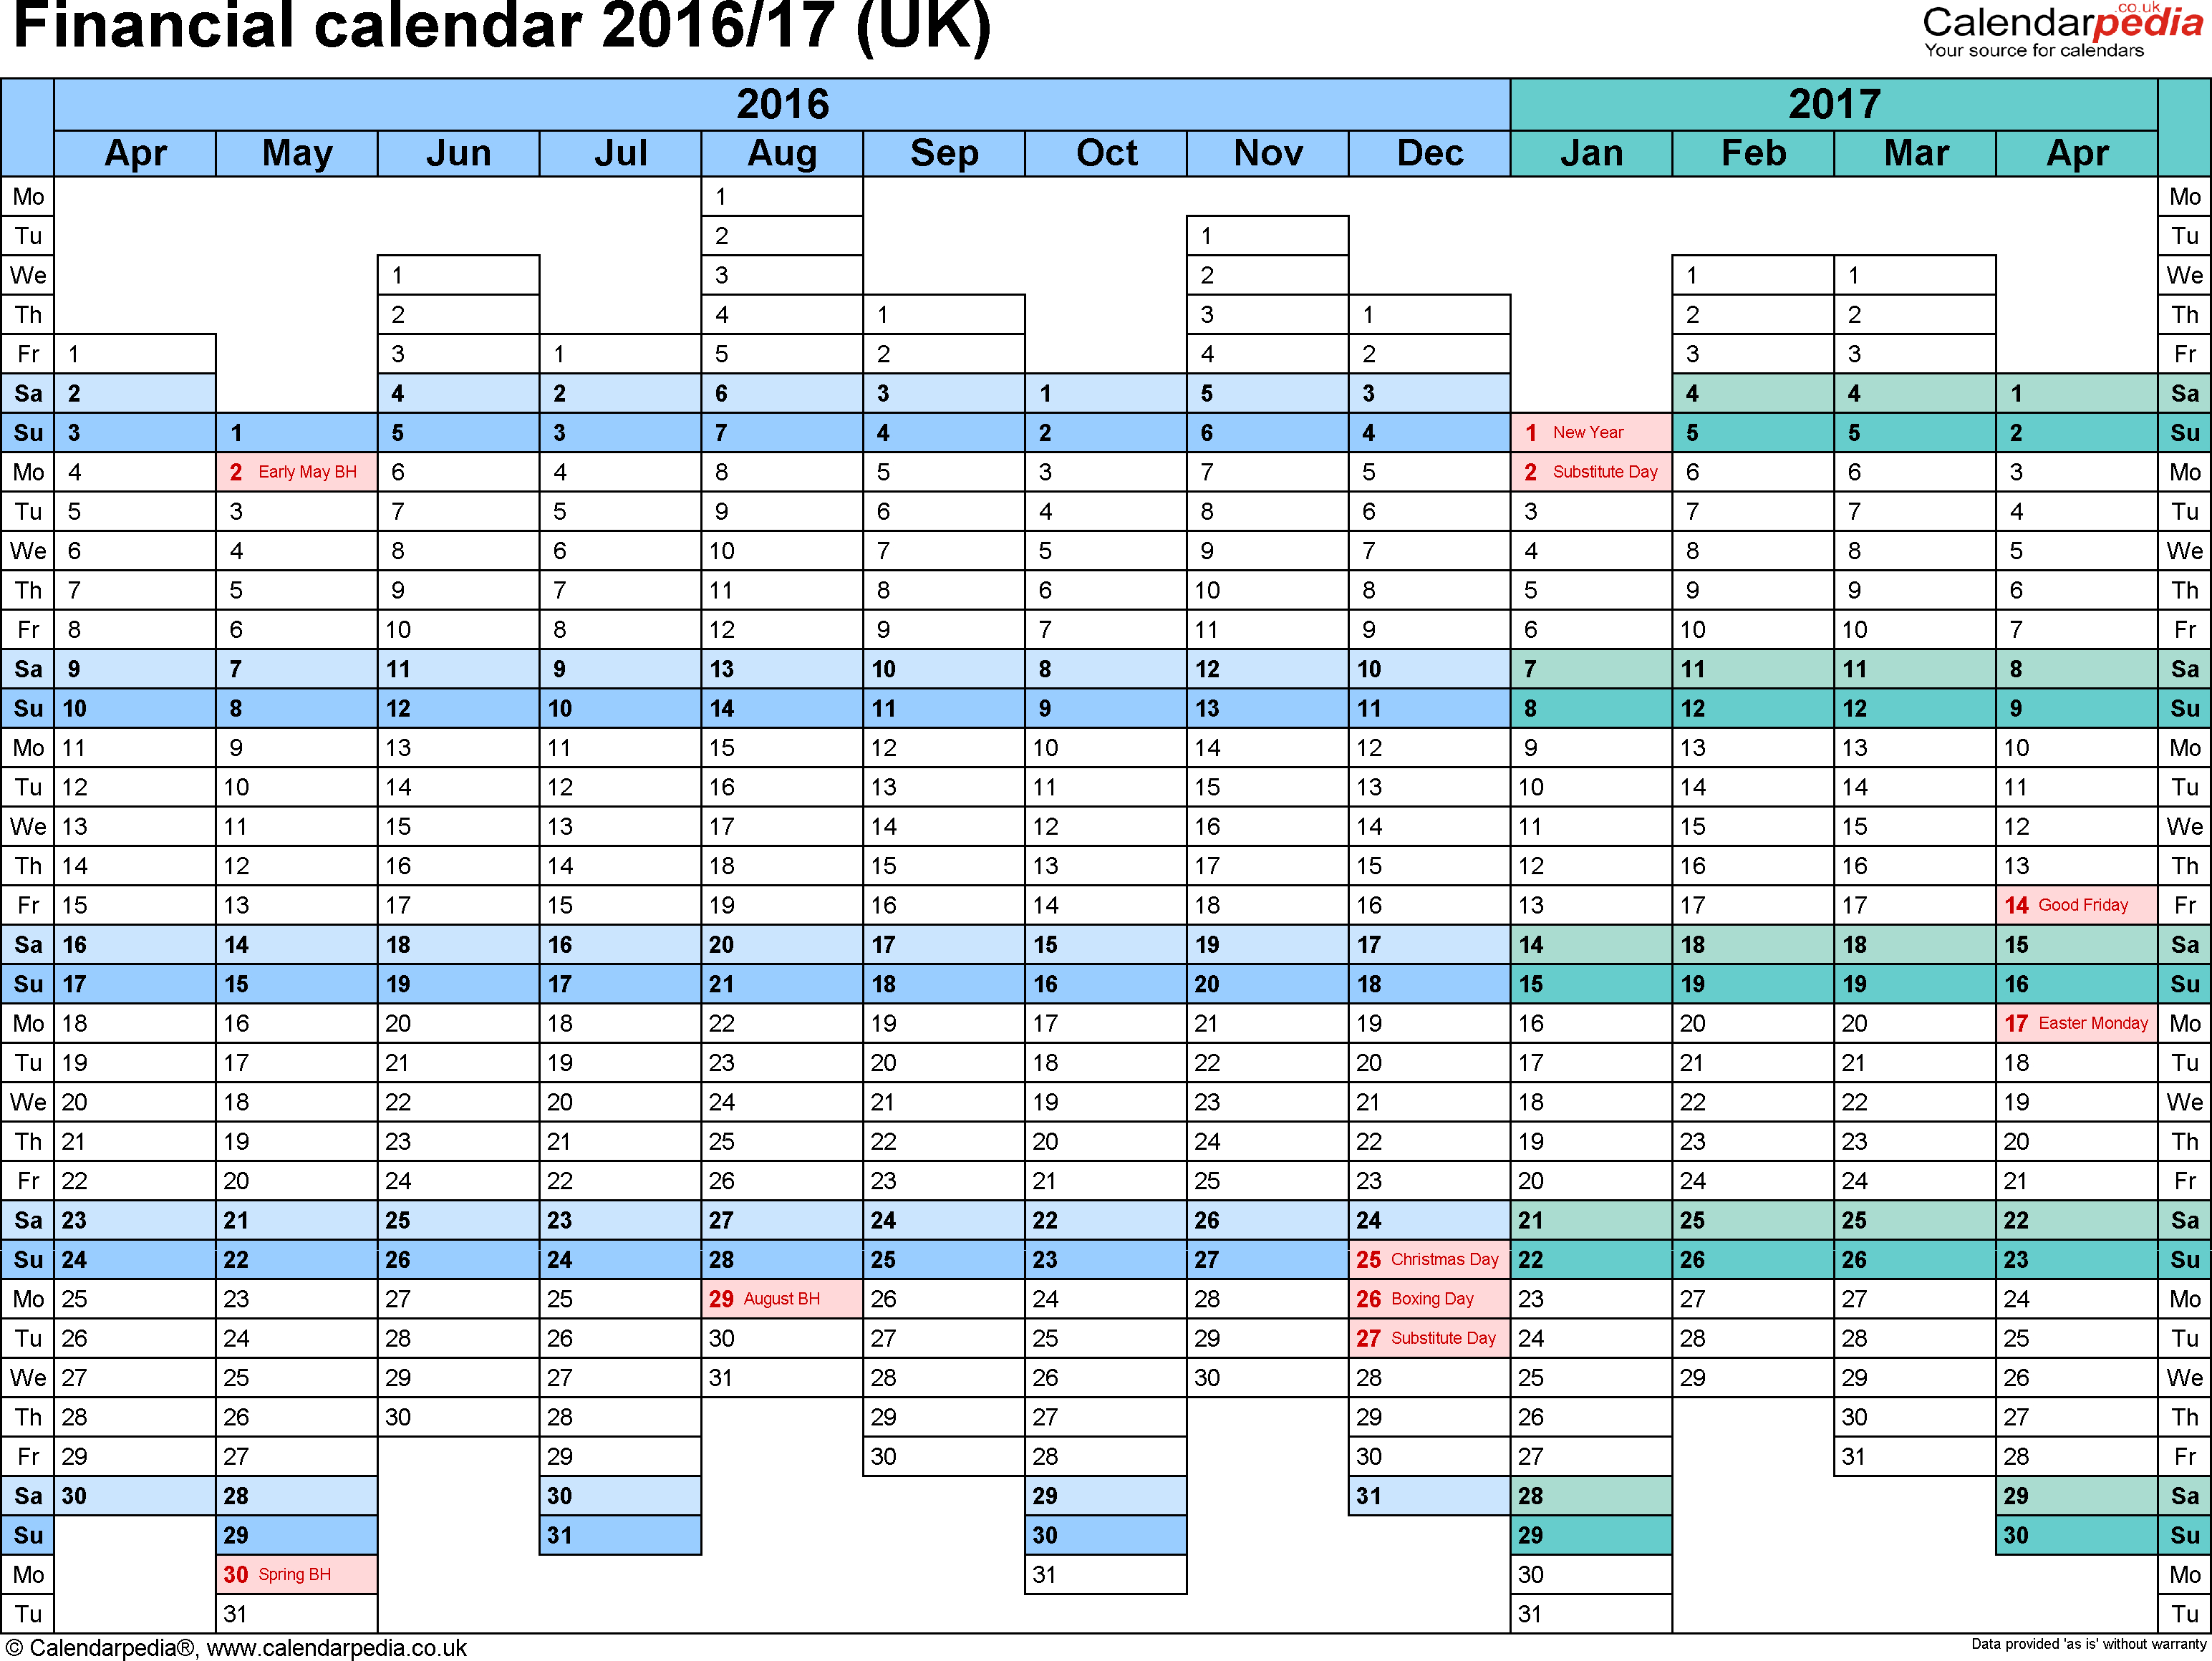 Payroll Spreadsheet Uk With Payroll Spreadsheet Template Excel And Financial Calendars 2016 17